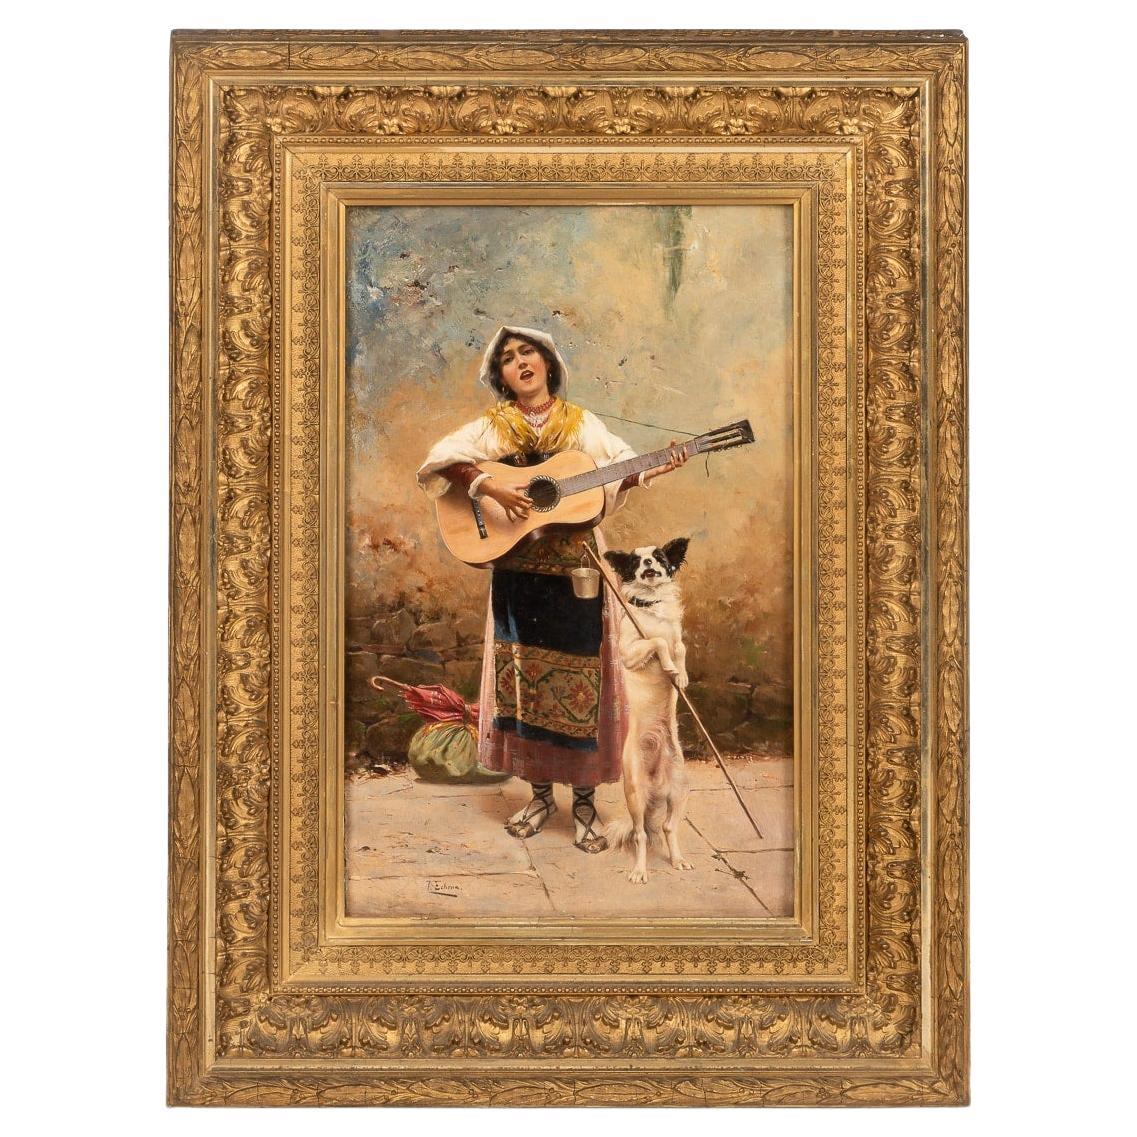 Oil On Board Of A Woman Playing Guitar, Signed By José Echena (Spain 1845-1909)